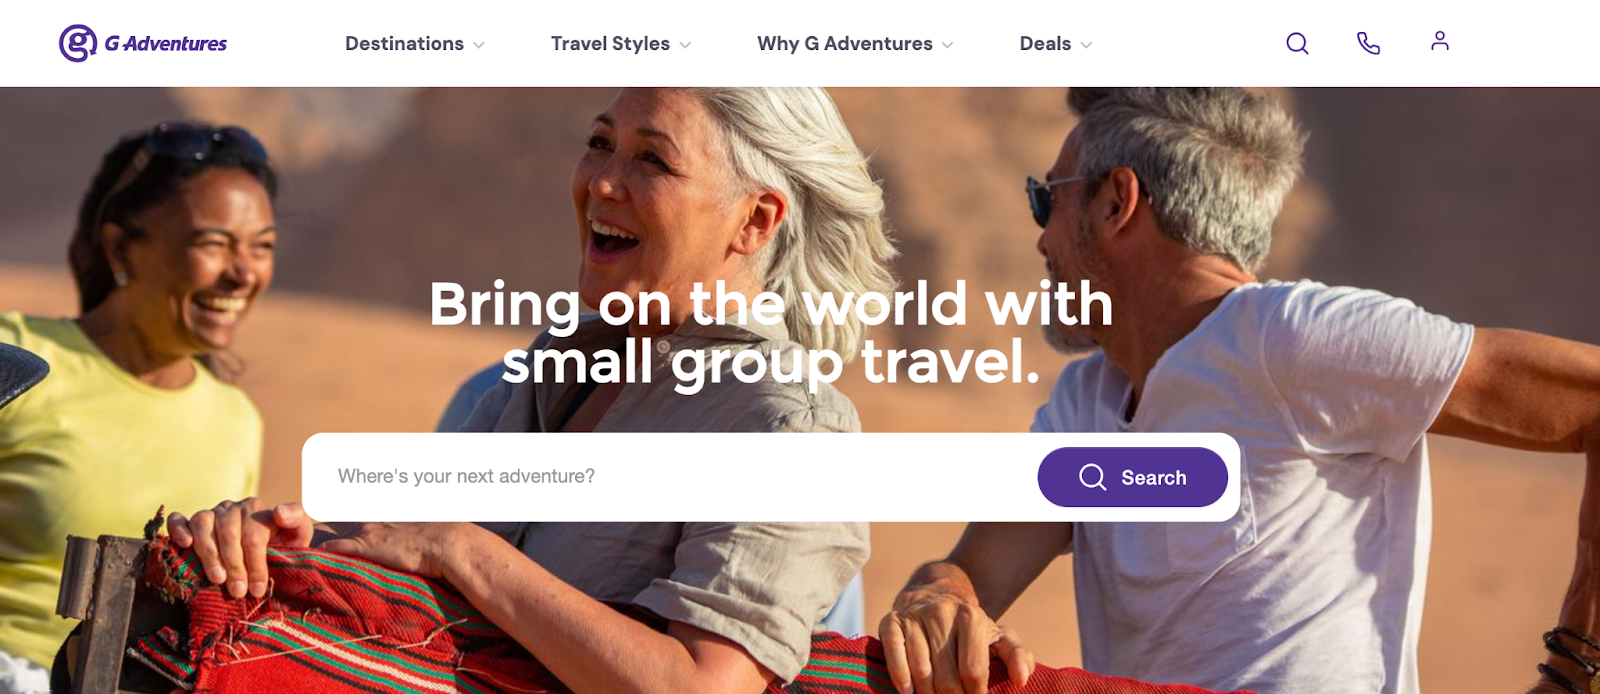 Travel affiliate program page for G Adventures